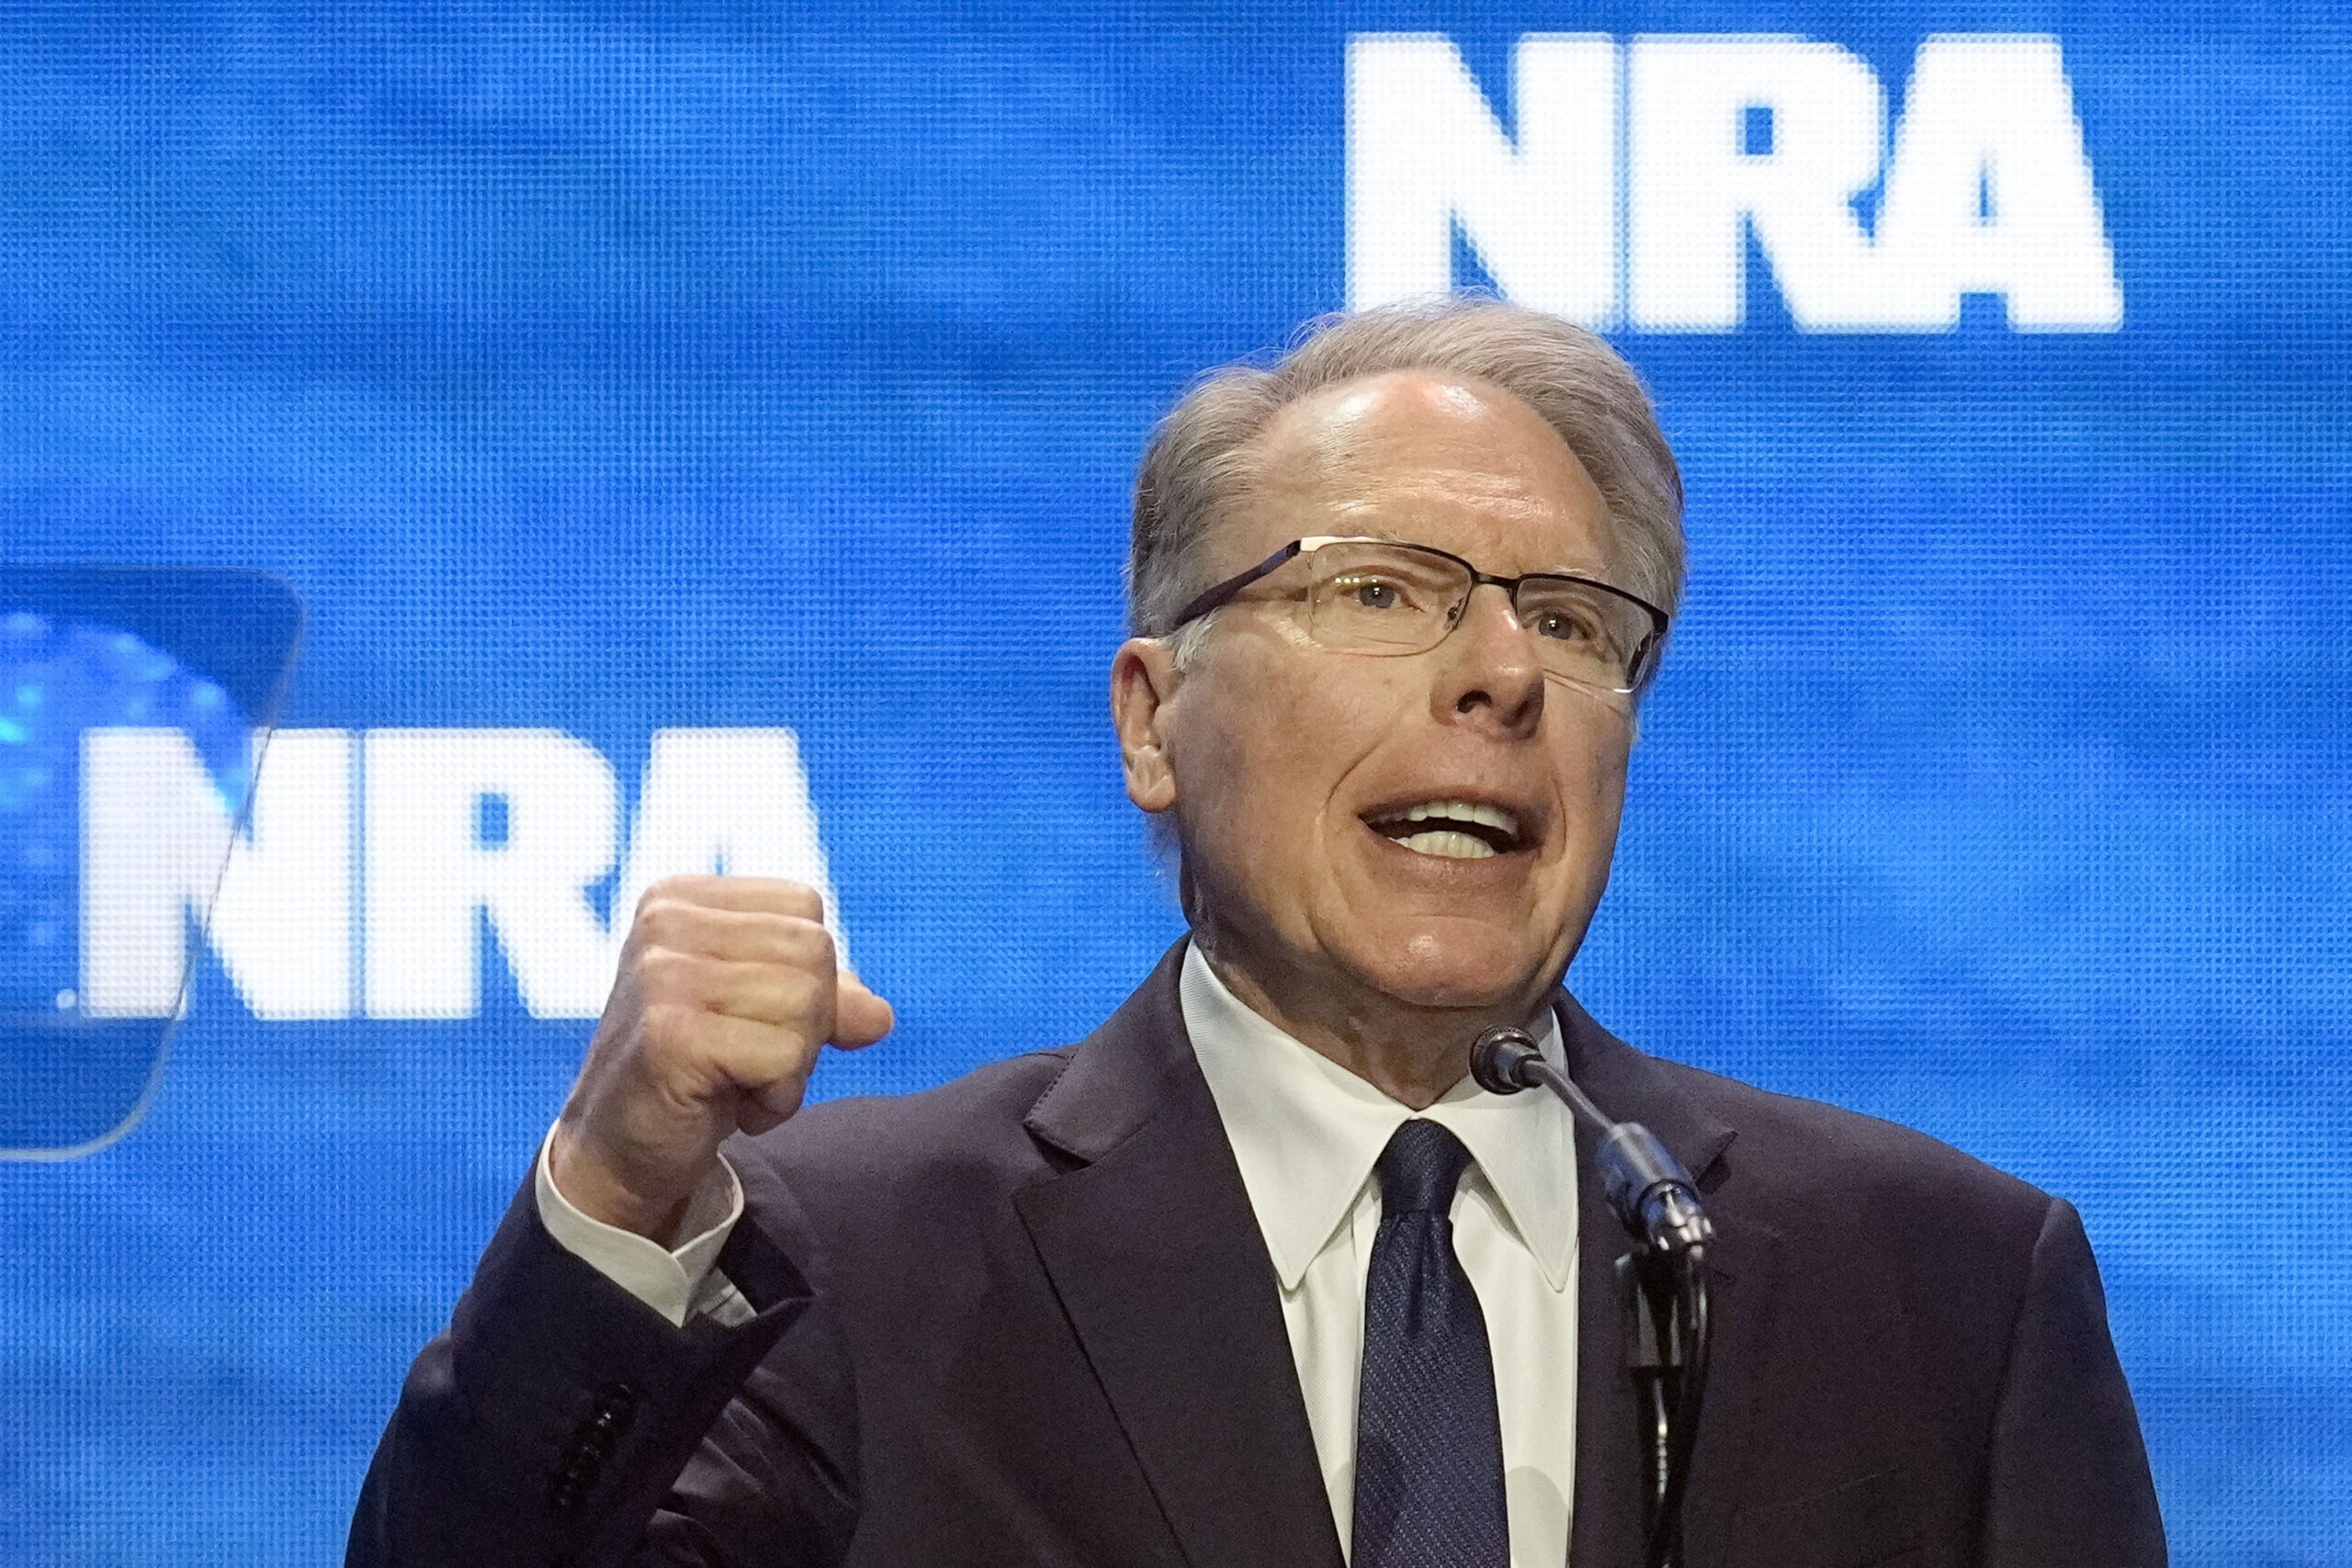 Wayne LaPierre, Architect of the Modern NRA, Resigns Ahead of